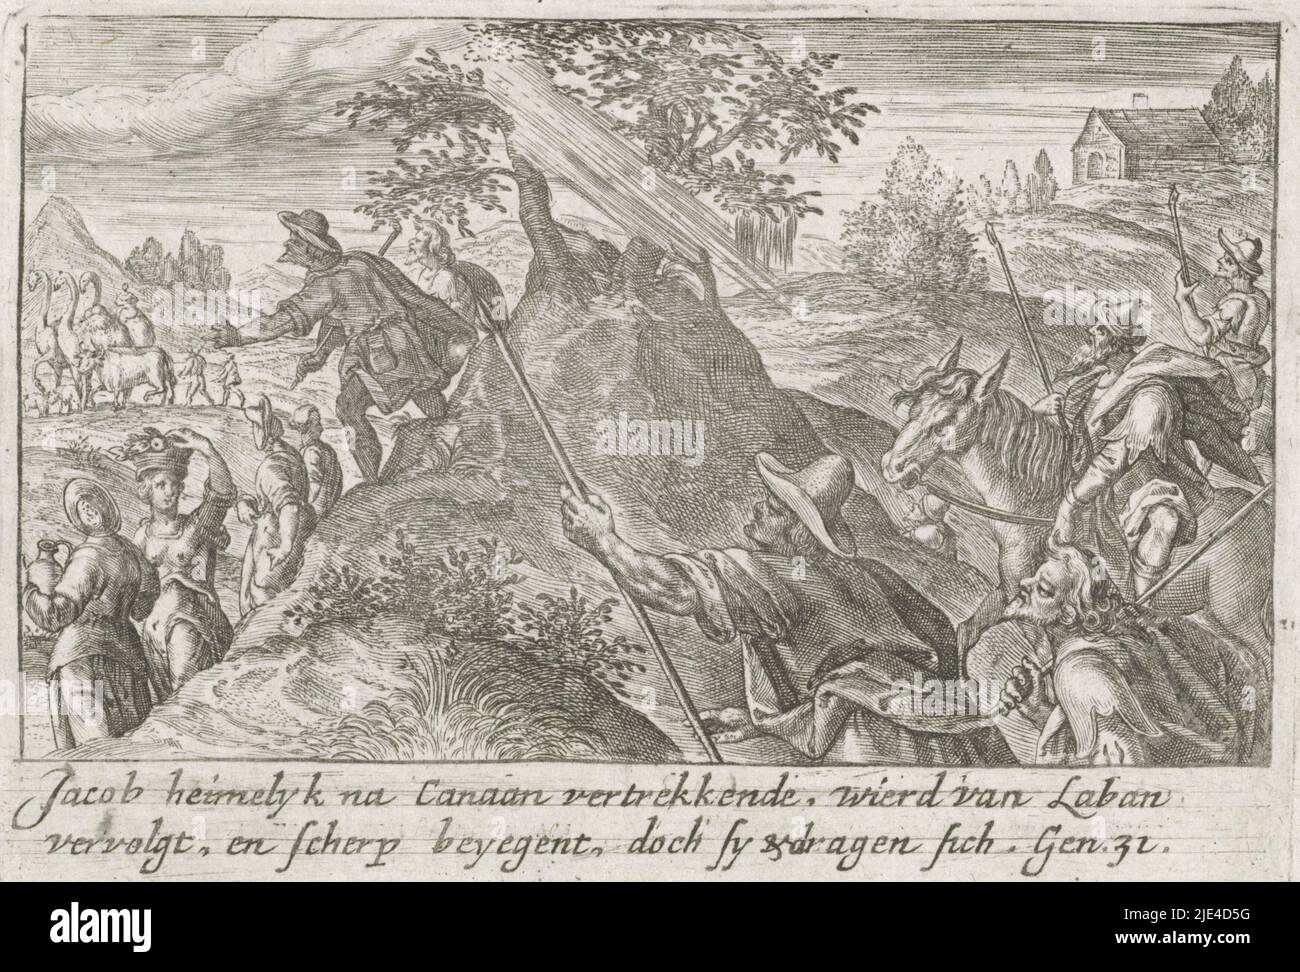 Laban pursues Jacob, Crispijn van de Passe (I), 1700 - 1750, Jacob secretly returns to Canaan, taking his wives, children and possessions with him. Laban sets off in pursuit and nearly overtakes him in the mountains of Gilead. In the margin a two-line caption in Dutch., print maker: Crispijn van de Passe (I), publisher: Isaac Greve, print maker: Utrecht, publisher: Amsterdam, 1700 - 1750, paper, engraving, h 85 mm × w 120 mm Stock Photo